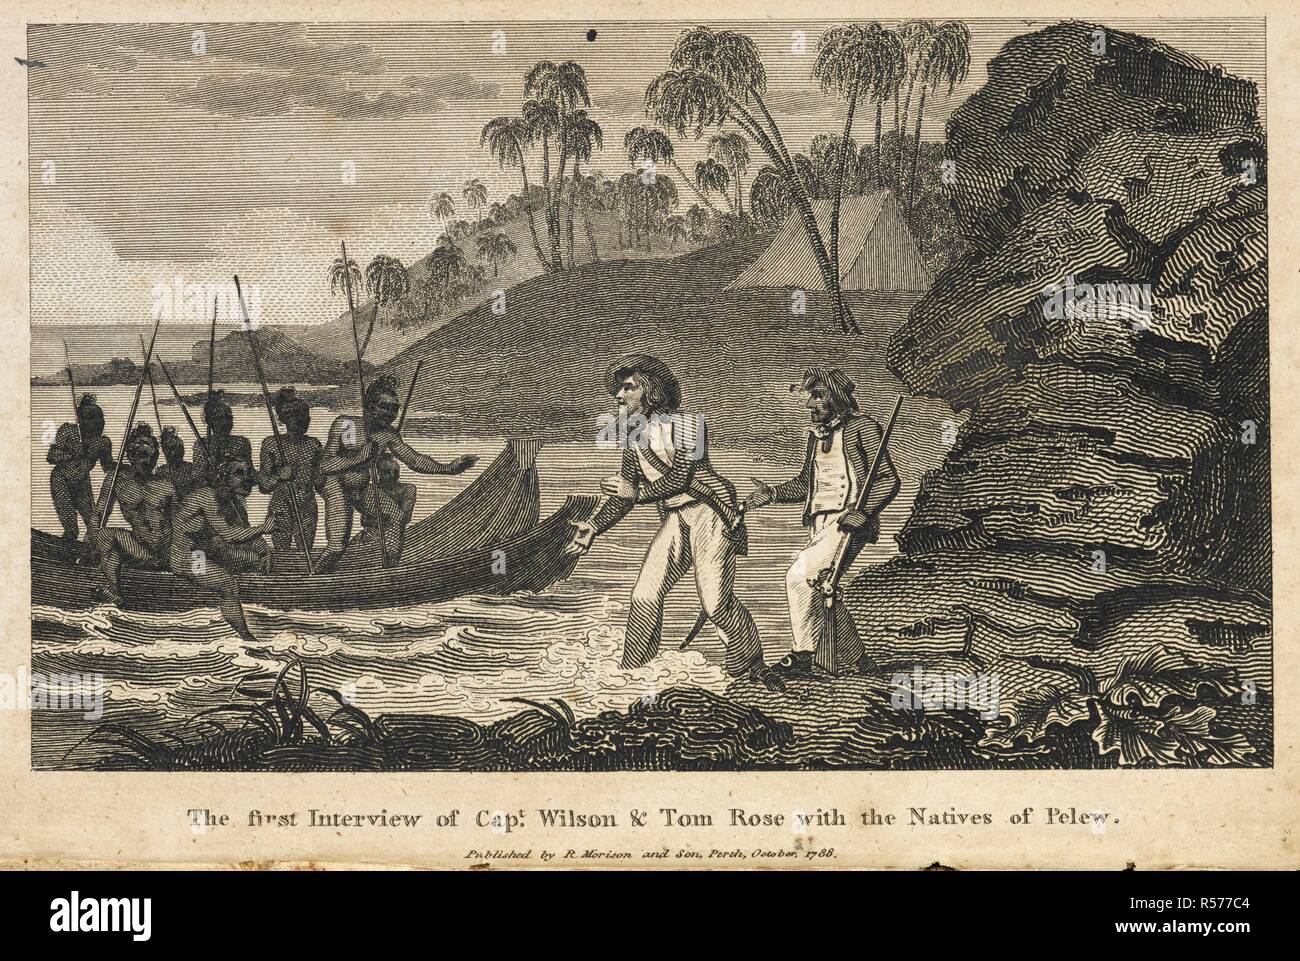 The first interview of Capt. Wilson & Tom Rose with the natives of Pelew. Narrative of the Shipwreck of the Antelope, East-India Pacquet, on the Pelew Islands ... in August, 1783. Perth : R. Morison & Son, 1788. Source: 10492.bb.76 frontispiece. Stock Photo